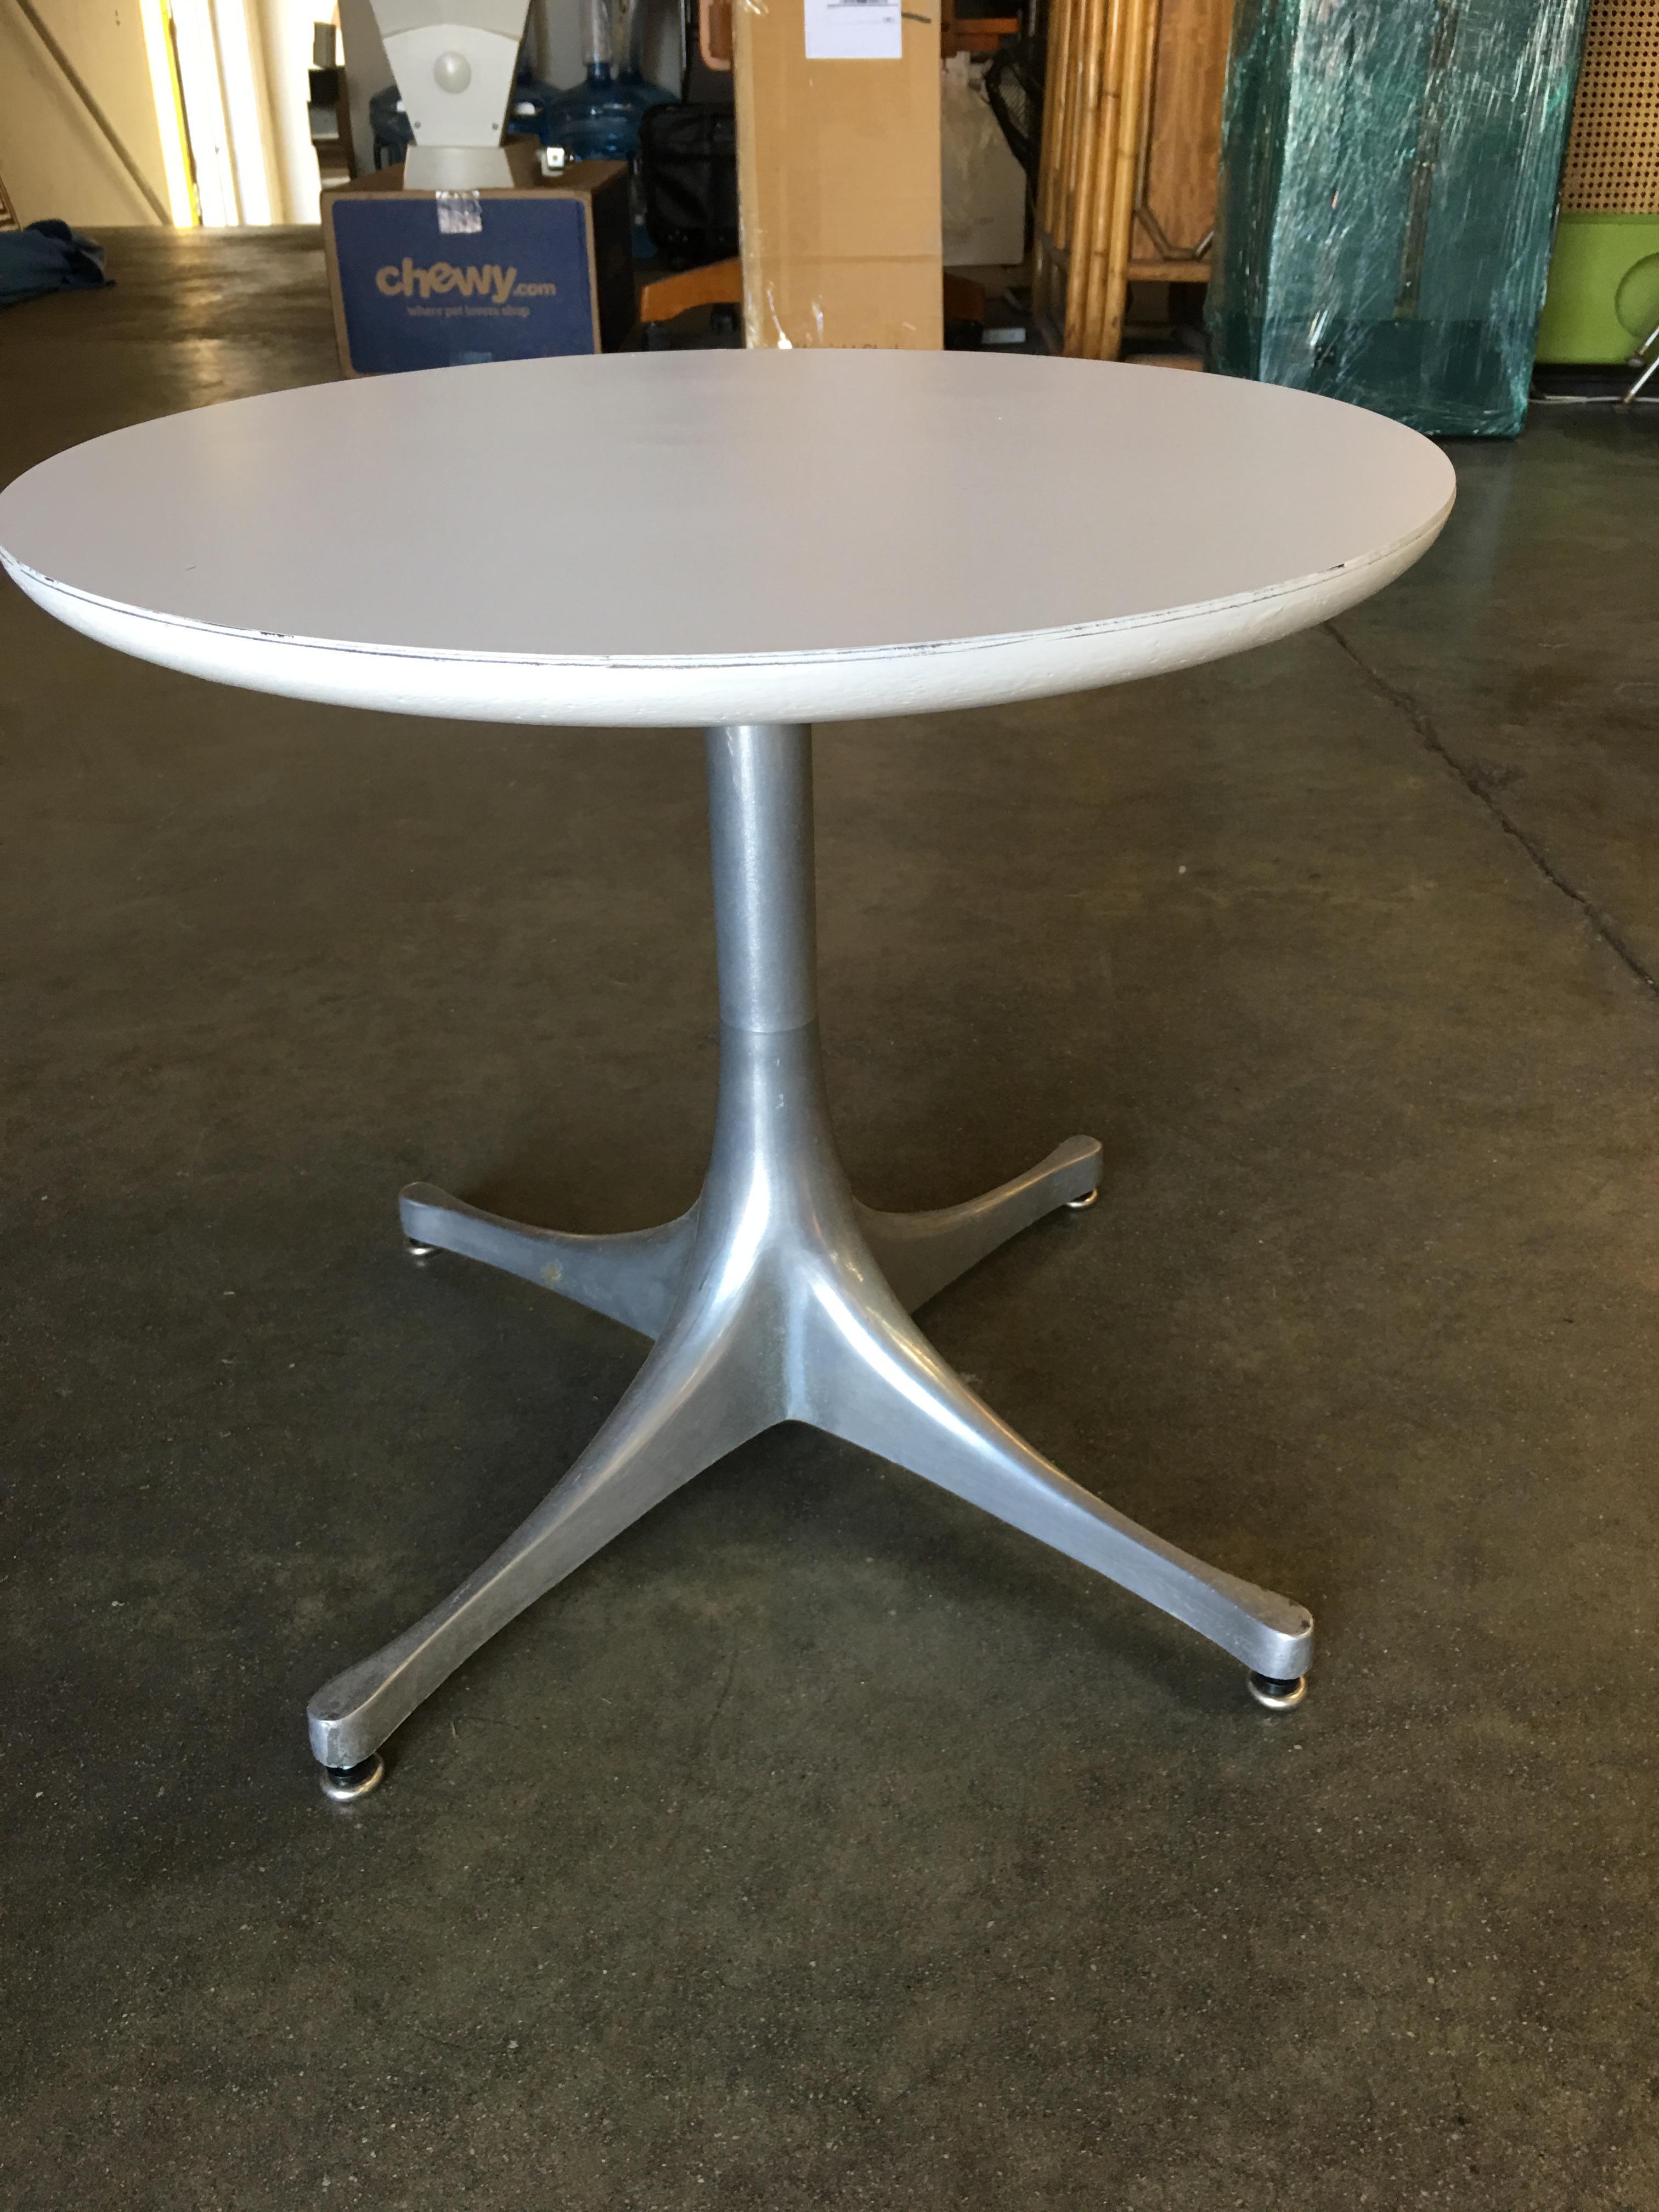 Model 5452 pedestal side table by George Nelson for Herman Miller featuring the iconic slopped top and root like 4 foot base.